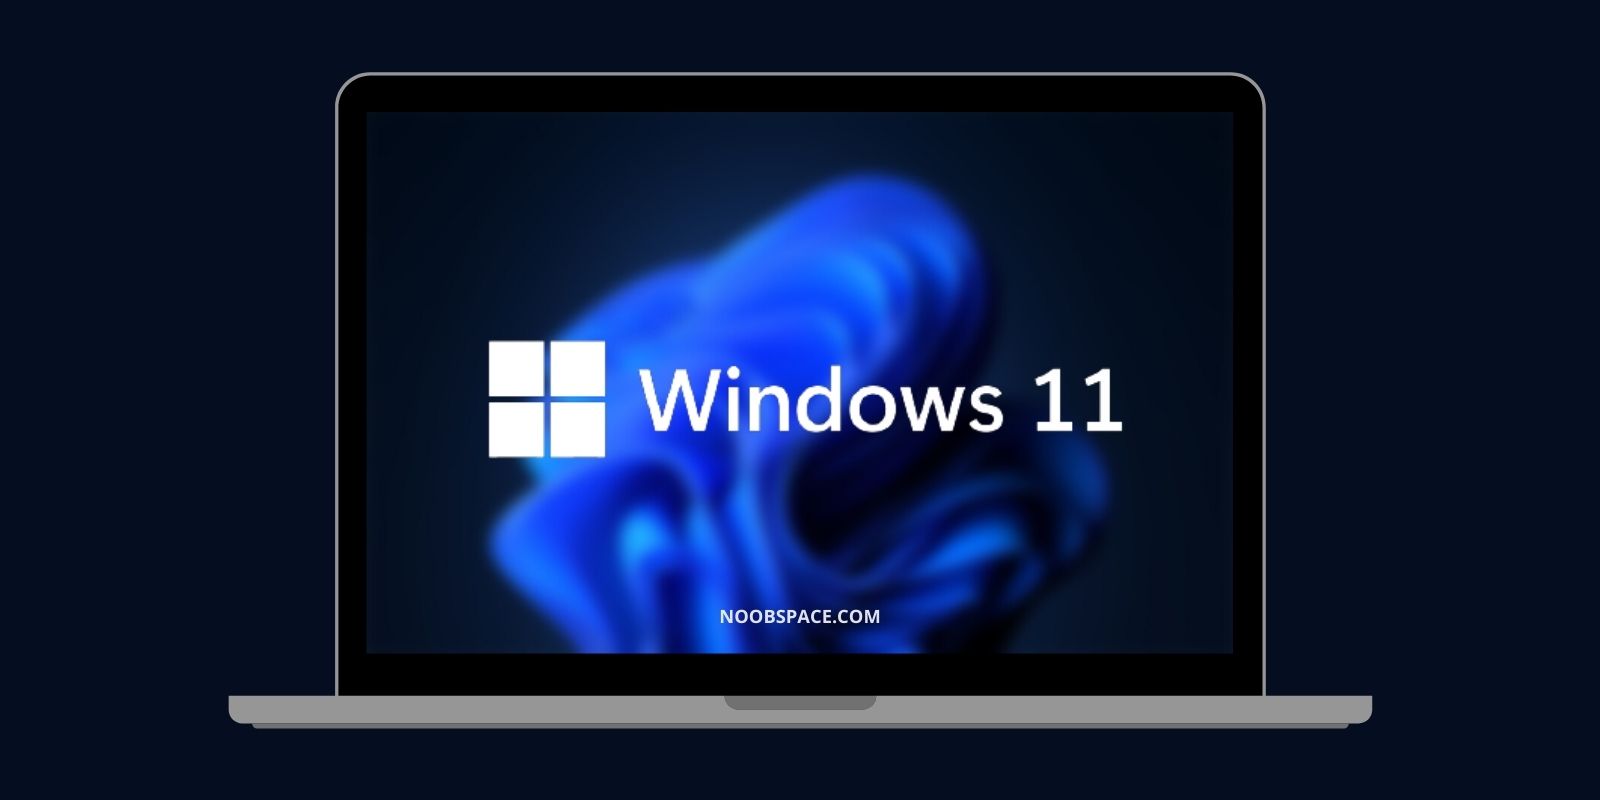 Free download Download All Windows 11 Wallpapers In 4K NoobSpace [1600x800]  for your Desktop, Mobile & Tablet | Explore 28+ Windows 11 4K Wallpapers | 4K  Wallpaper Windows 10, 4K Windows 10 Wallpaper, 4K Wallpaper Windows Theme